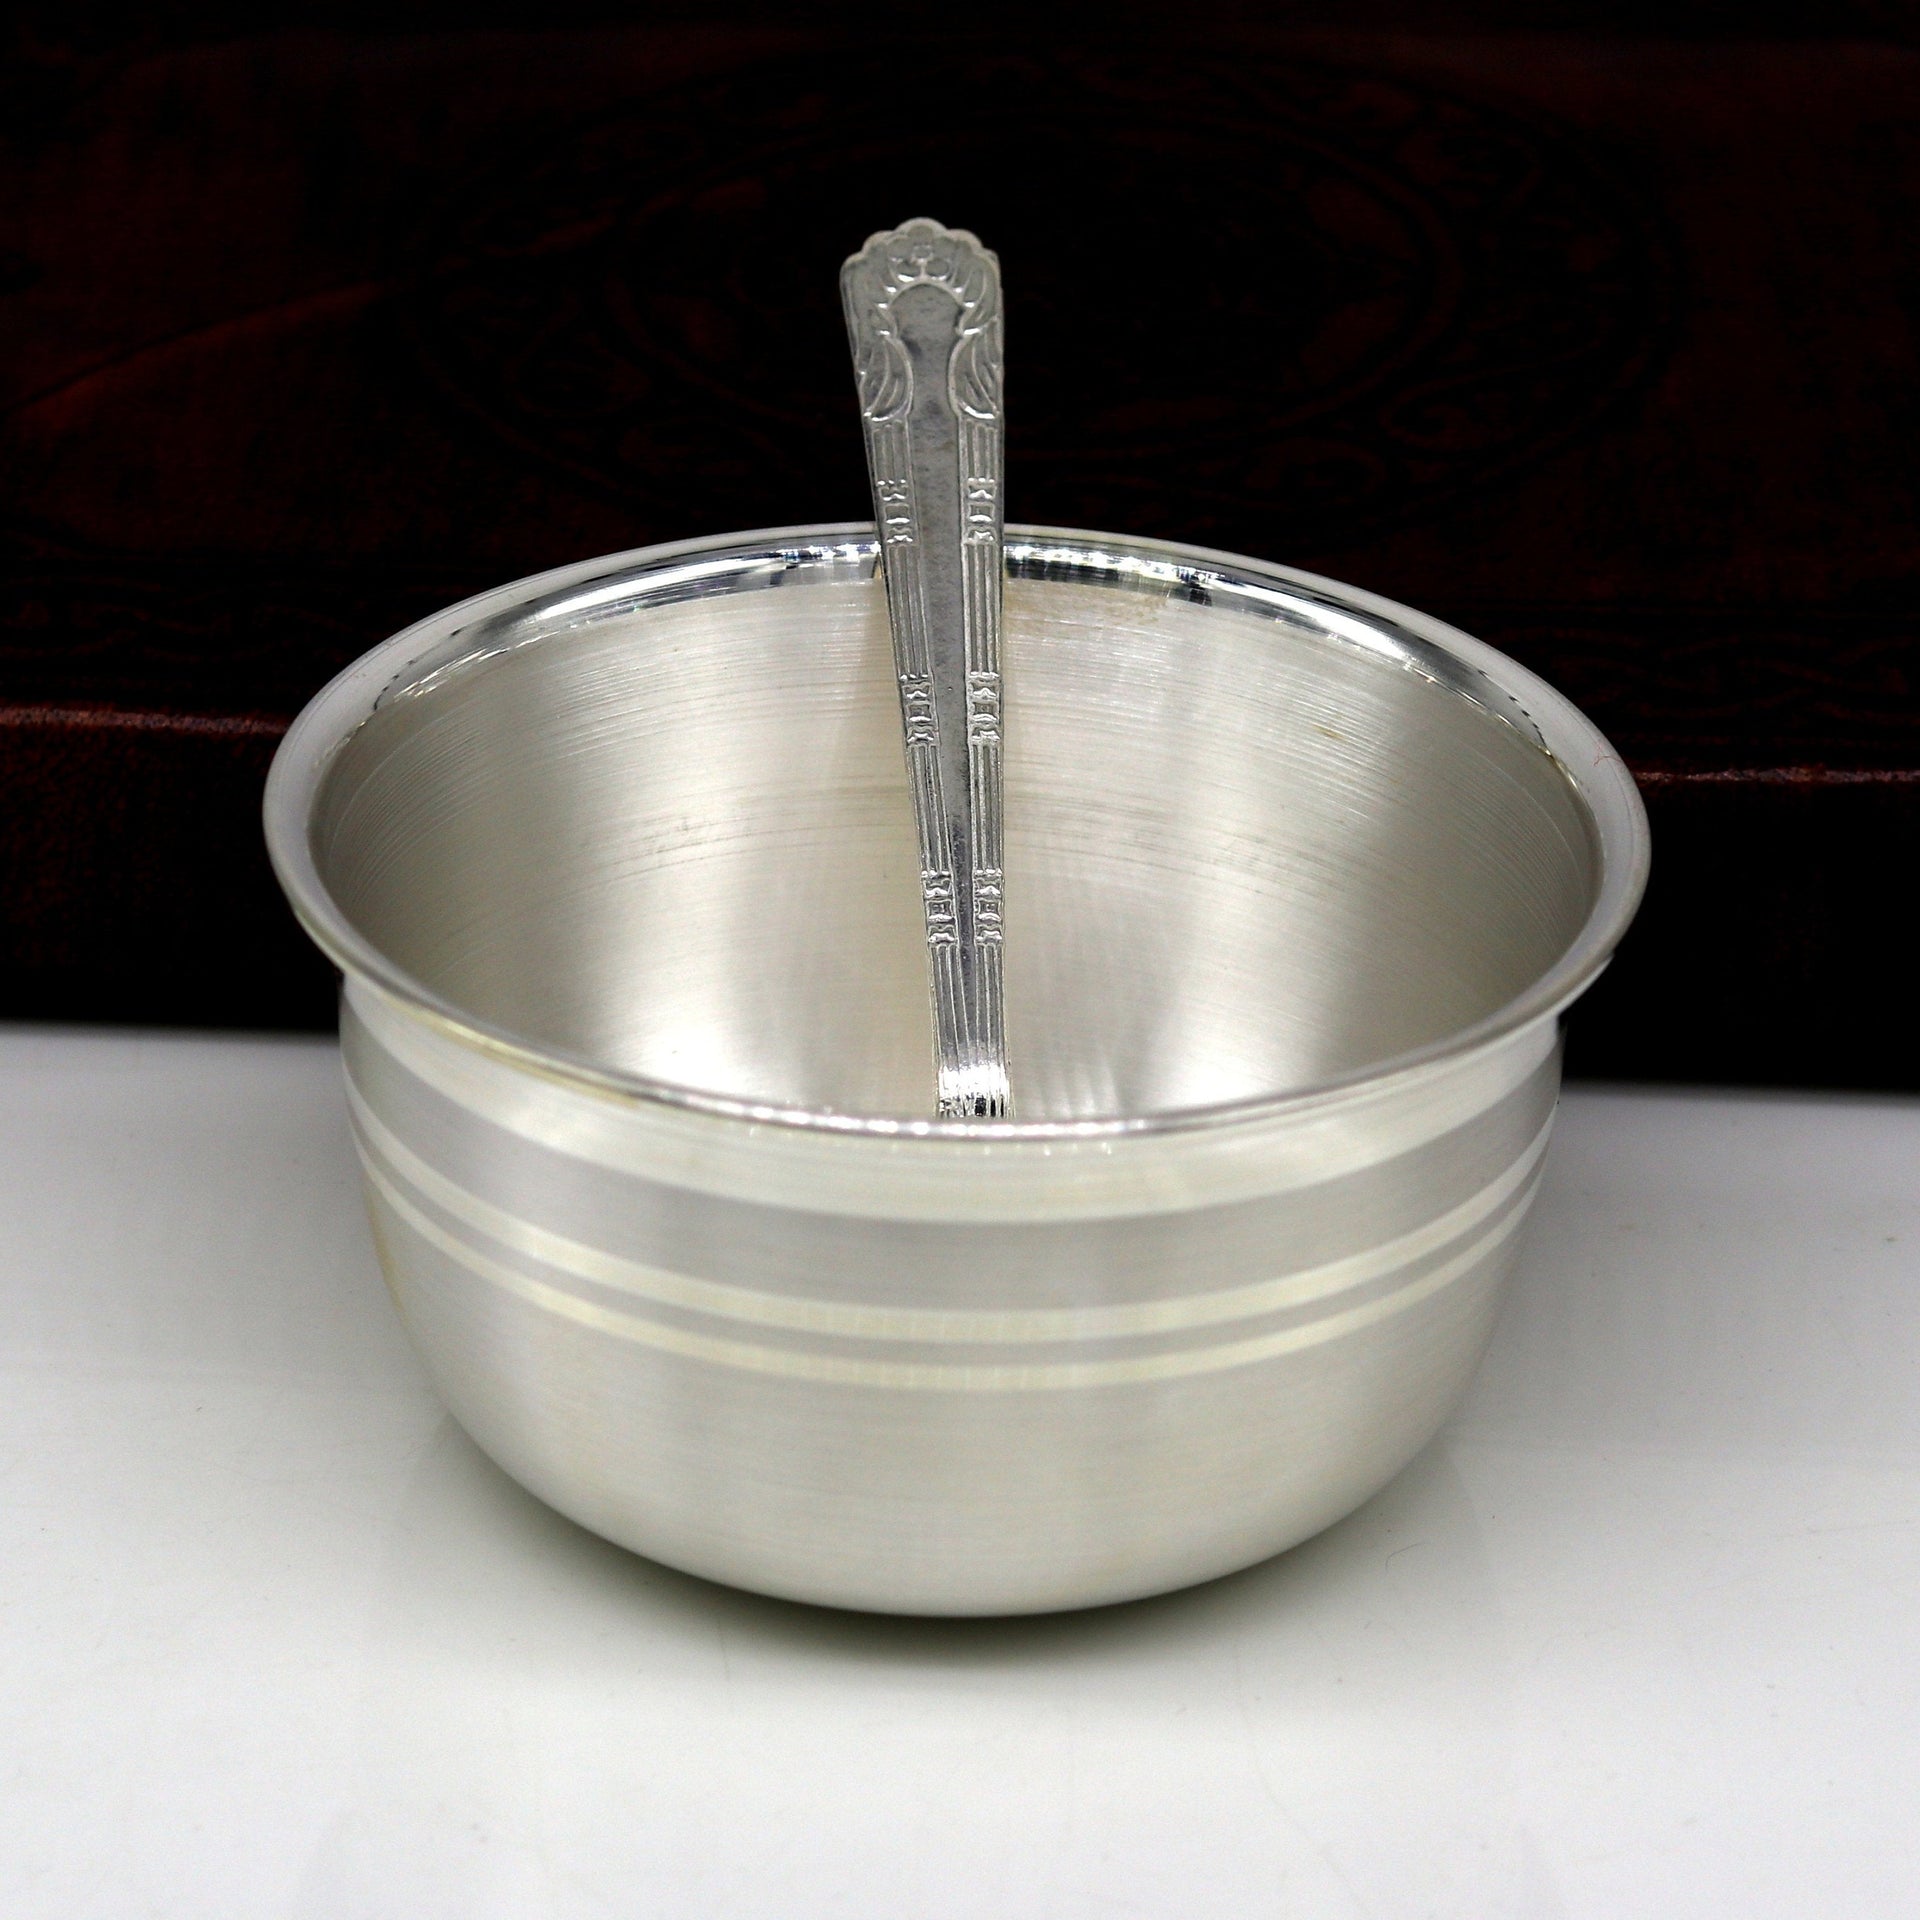 Handmade 99.9% Solid Pure Silver Baby Bowl With Small Spoon Silver Vessels,  Daily Use Silver Utensils for Your Healthy Baby or Kids Sv12 -  Norway